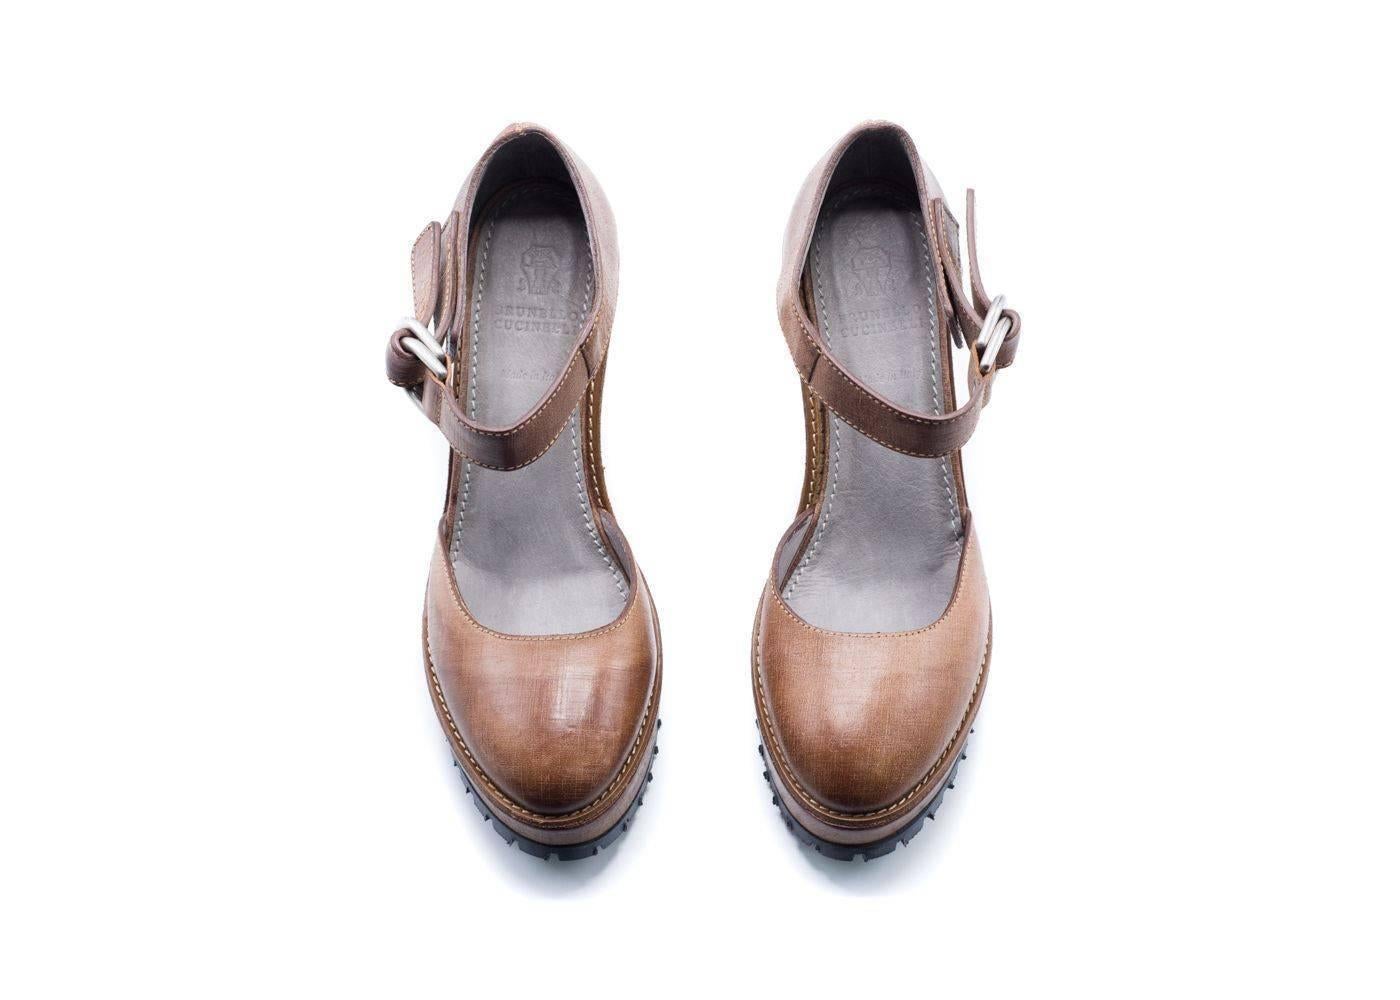 Brand New Brunello Cucinelli Pumps
Original Box Included
Retails in Stores & Online for $1500
Size E40 / US 10 Fits True to Size

Classic brown pumps from Brunello Cucinelli with a double ankle strapped detailing. Perfect for any outfit on any day